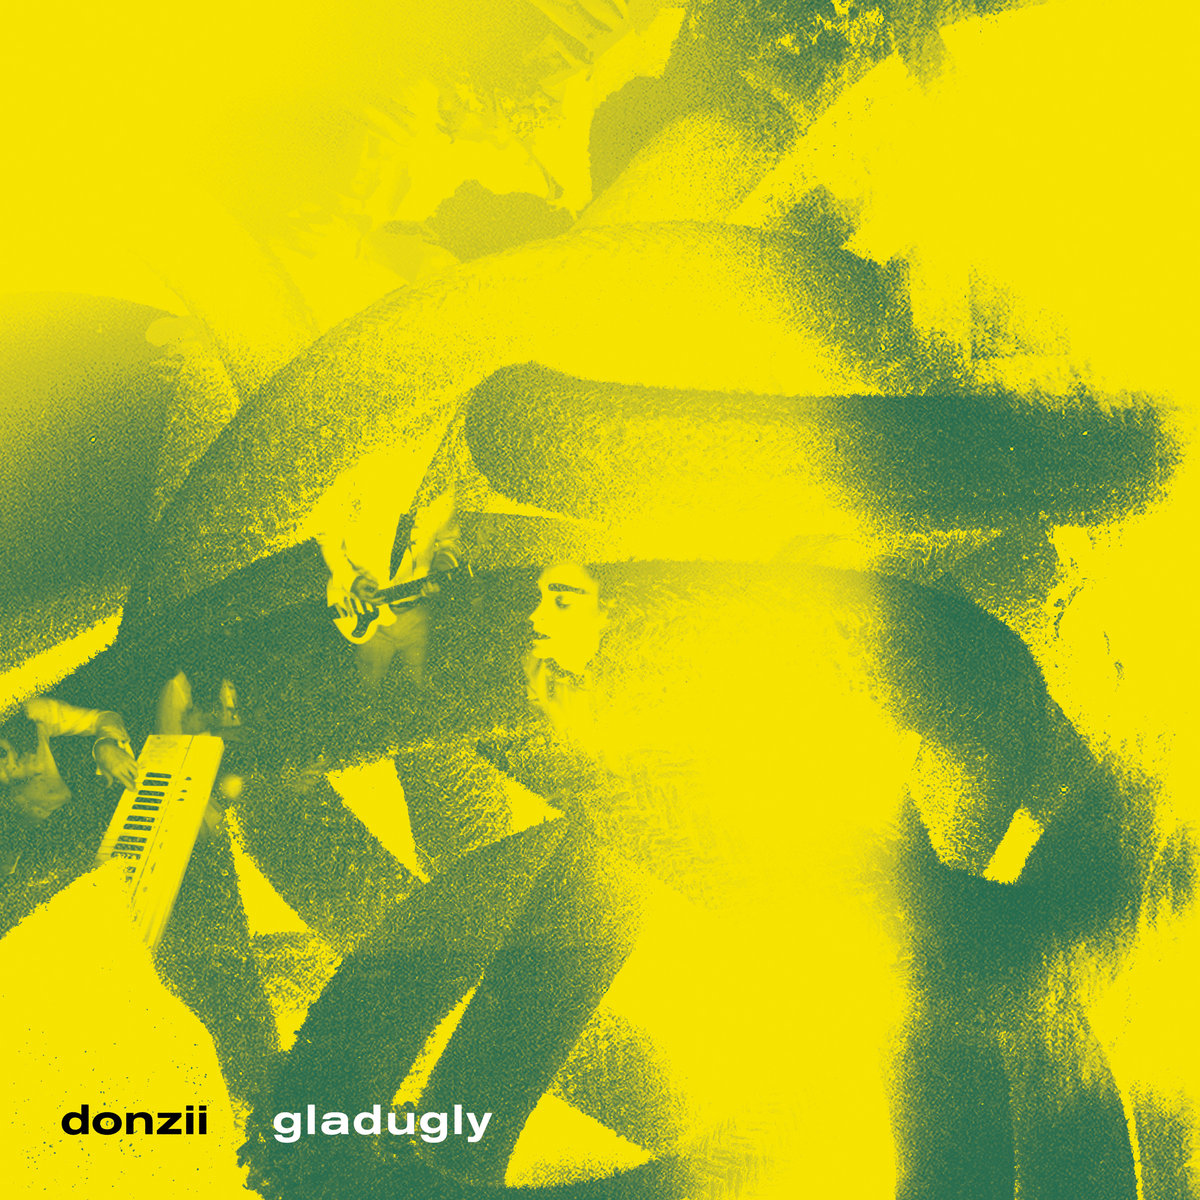 album cover for Donzii's Gladugly EP